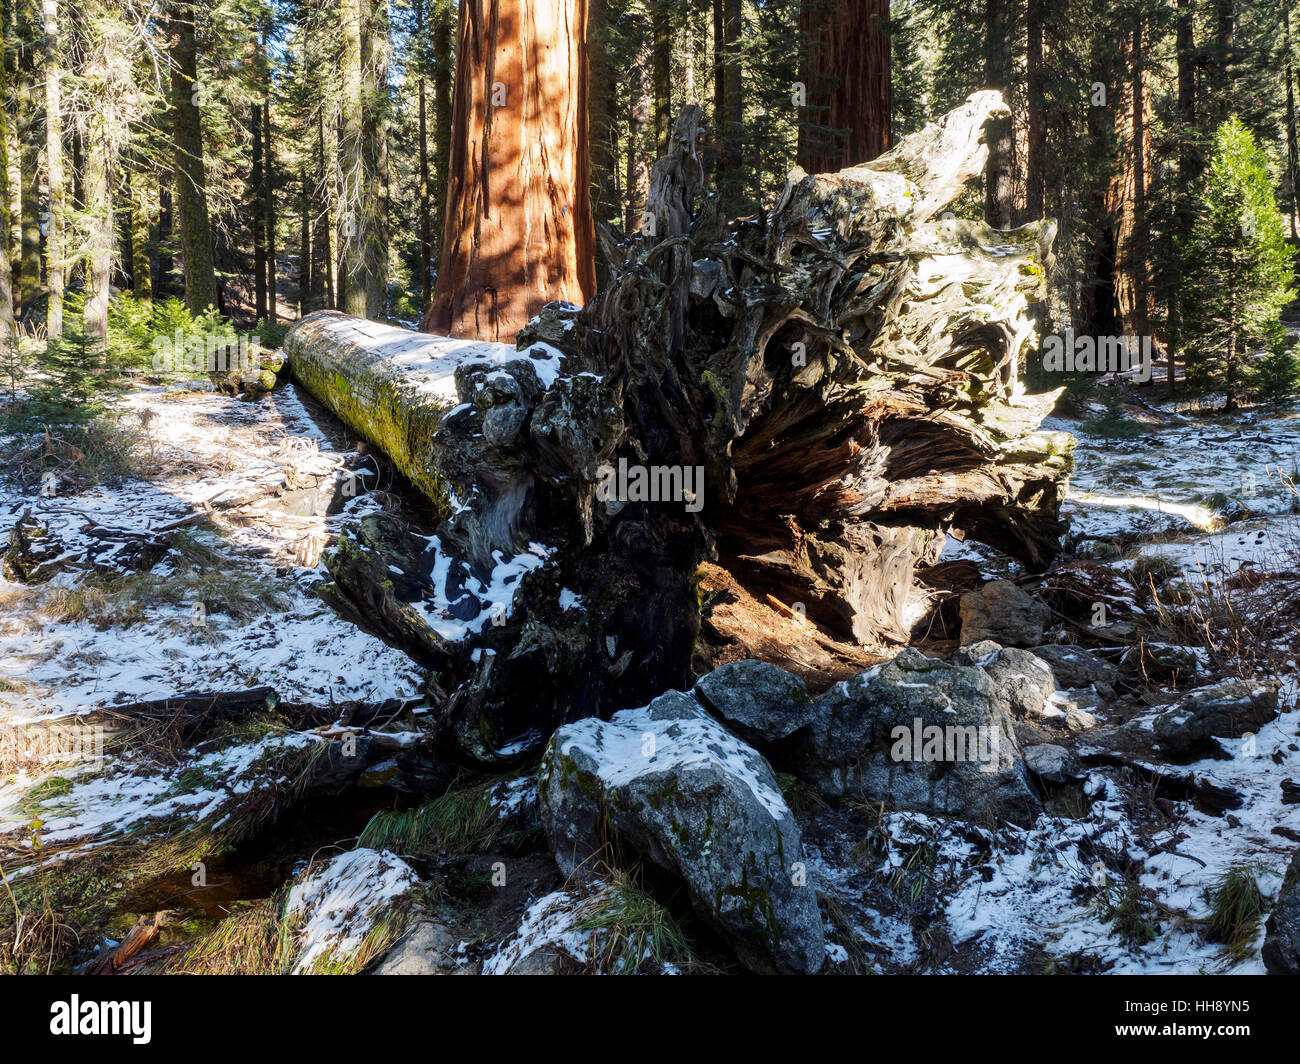 Fallen giant redwood tree near the Giant Forest Museum on the Generals Highway in Sequoia National Park, California. Stock Photo